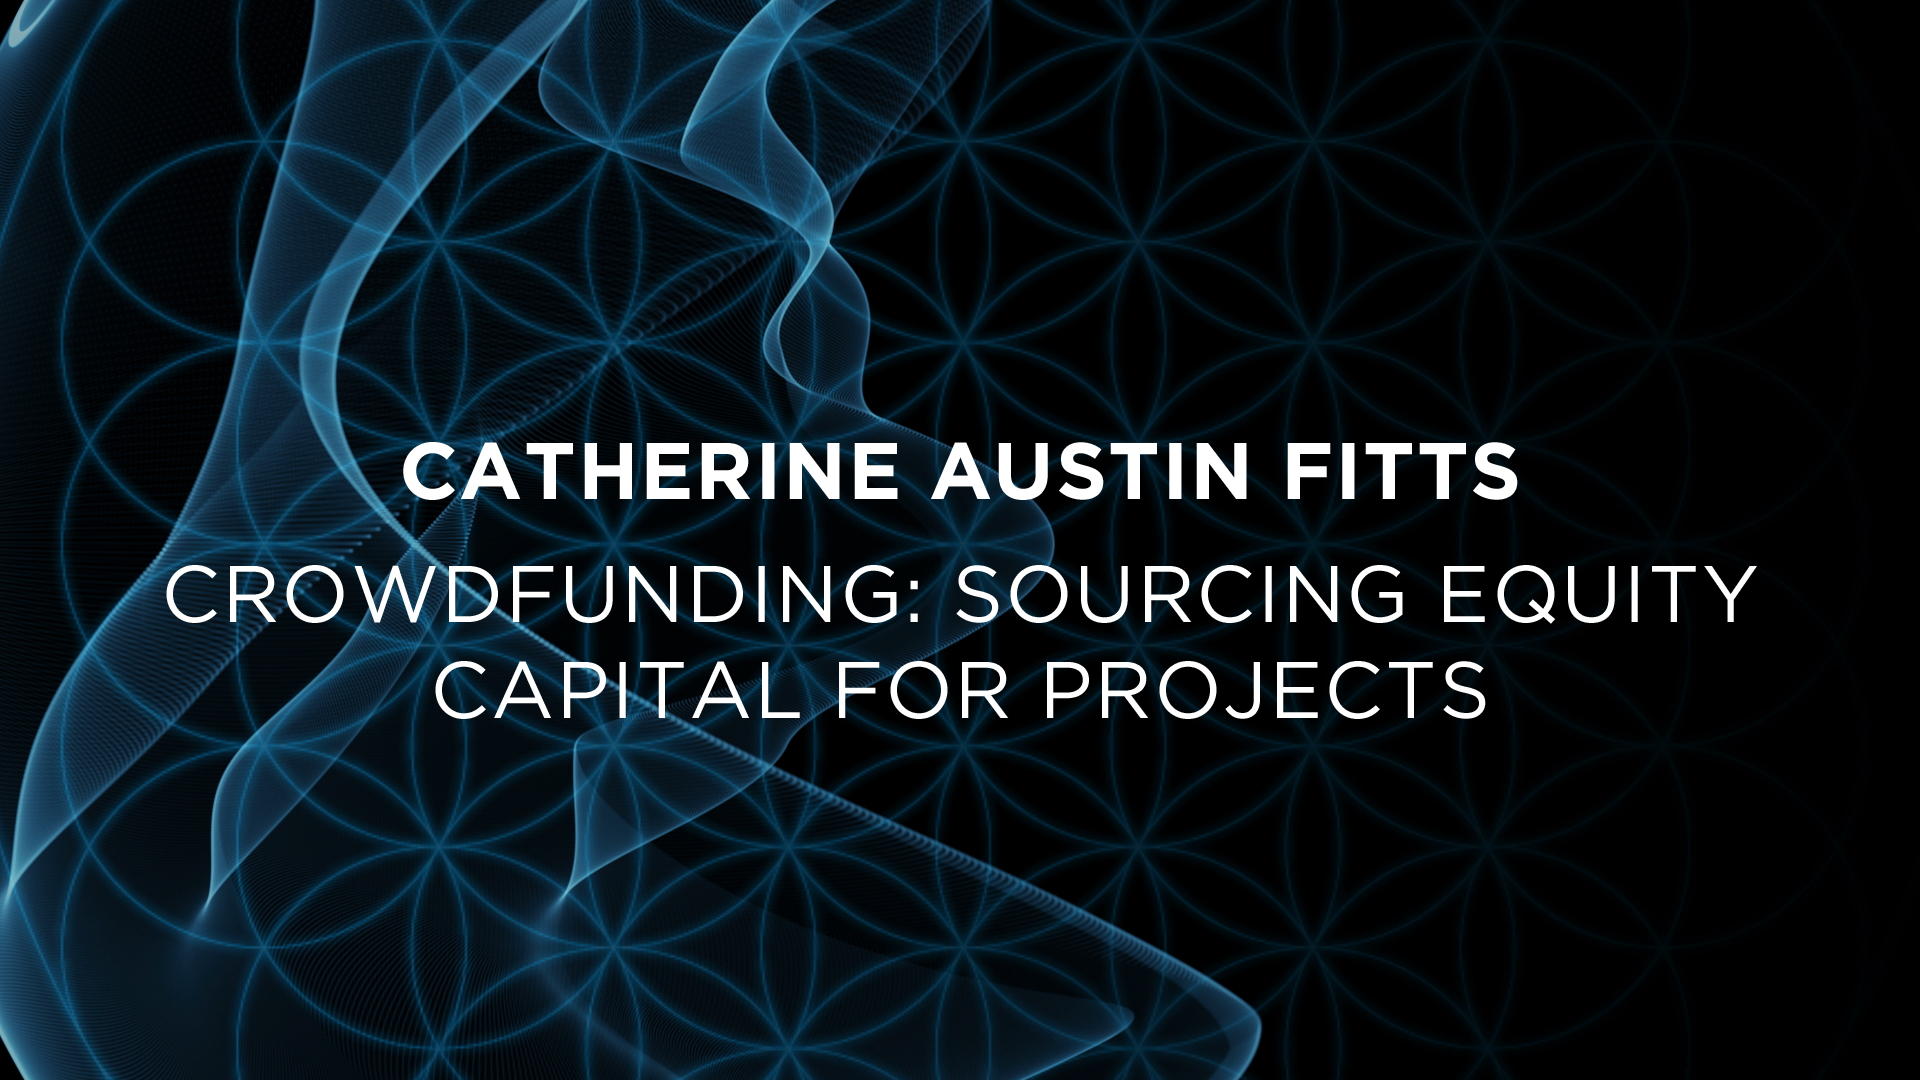 Catherine Austin Fitts : CROWDFUNDING, SOURCING EQUITY CAPITAL FOR PROJECTS